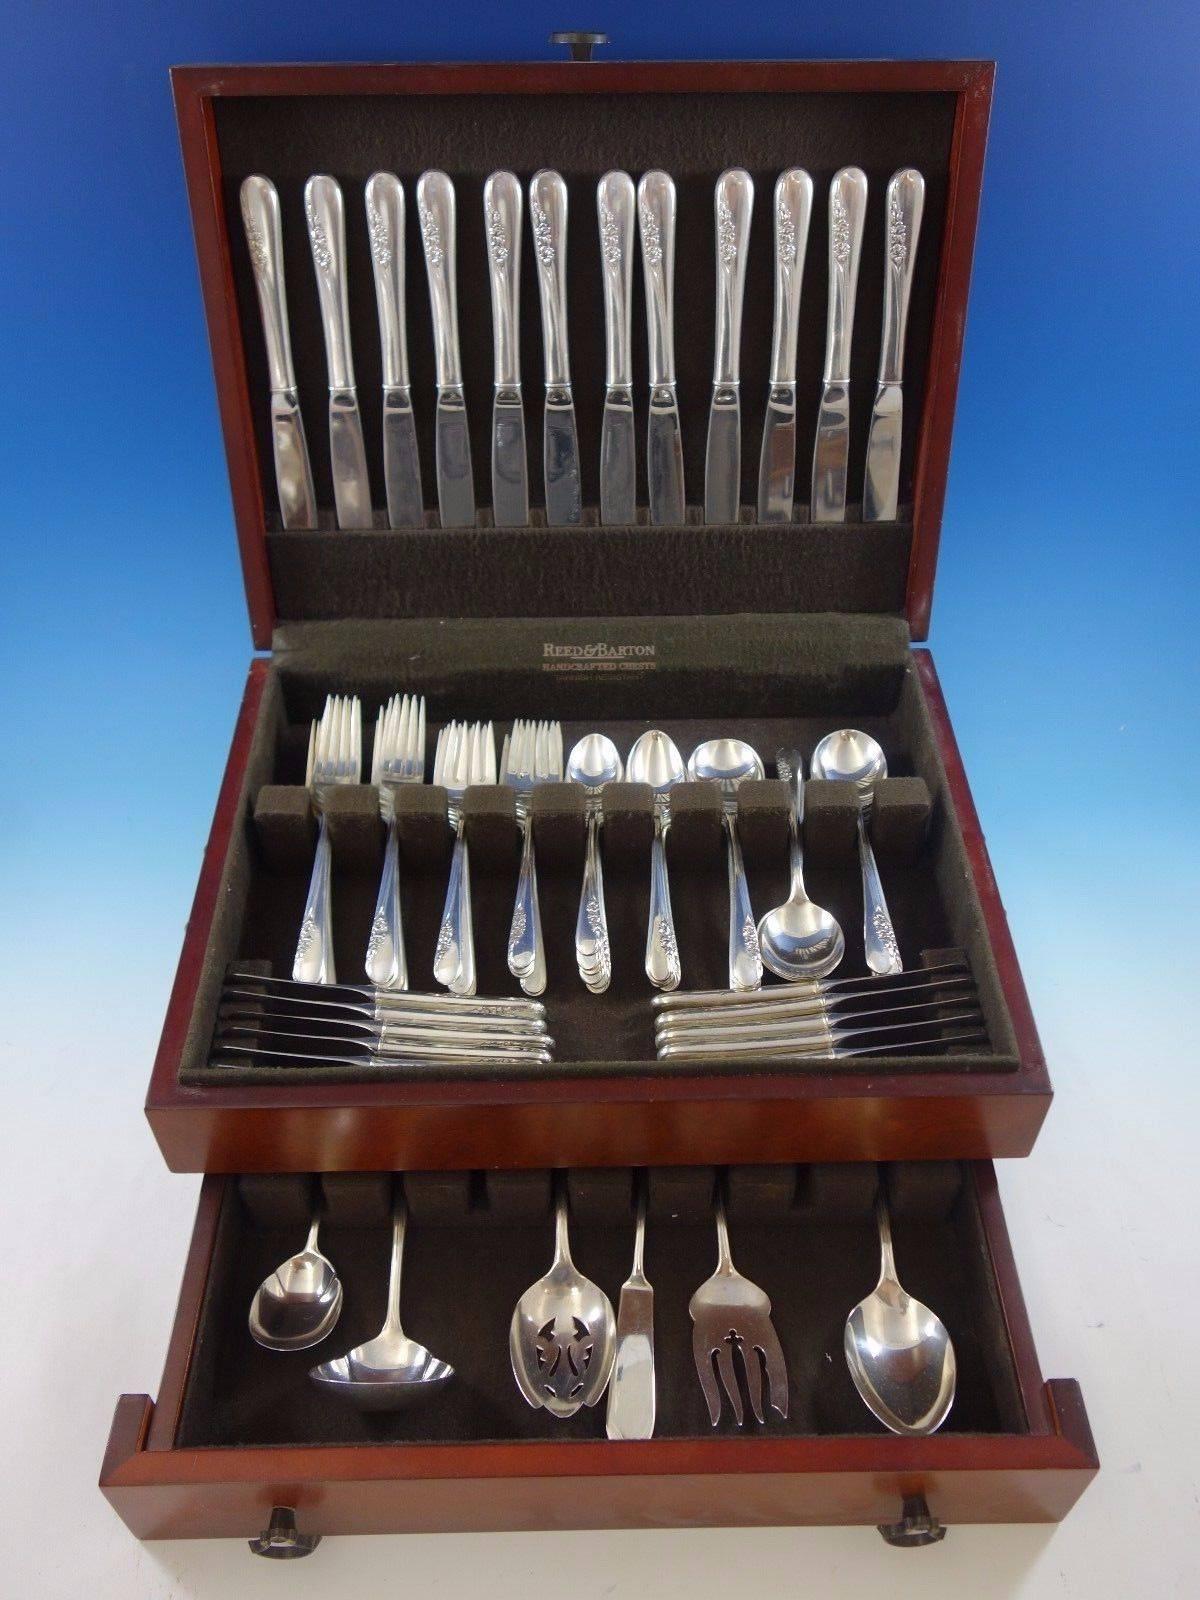 Blossom time by International sterling silver flatware set, 78 pieces. This set includes: 

12 knives, 9 1/4